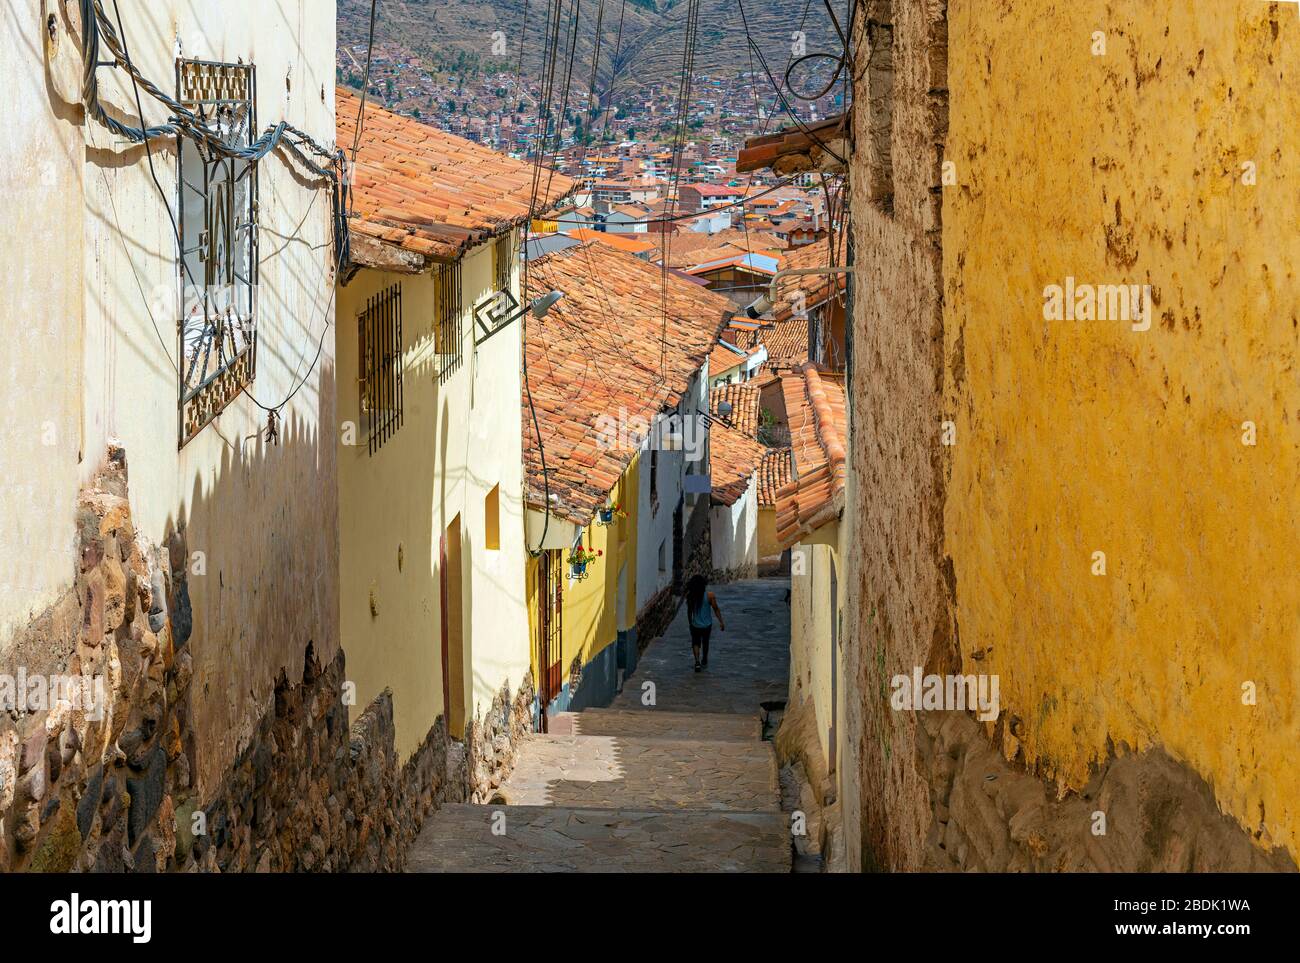 A traditional colonial style street in the San Blas district of Cusco with a unrecognizable person walking down the stairs, Cusco Province, Peru. Stock Photo